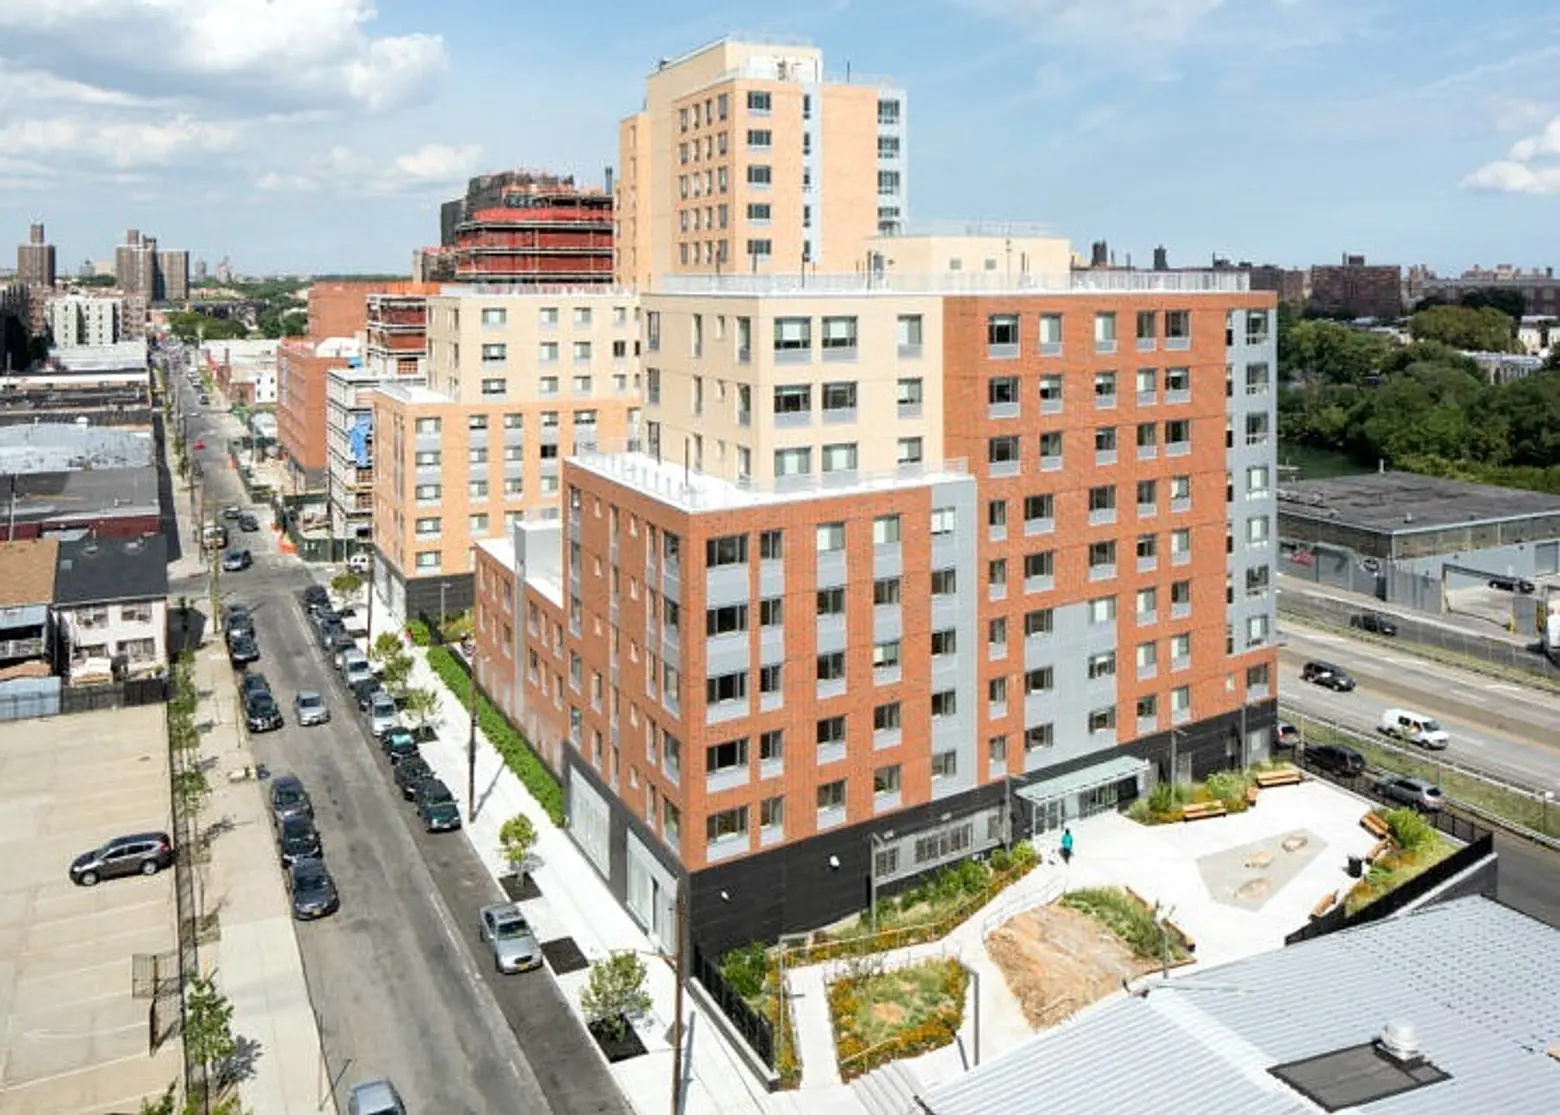 328 new affordable apartments available at Compass III residences in the Bronx from $331/month